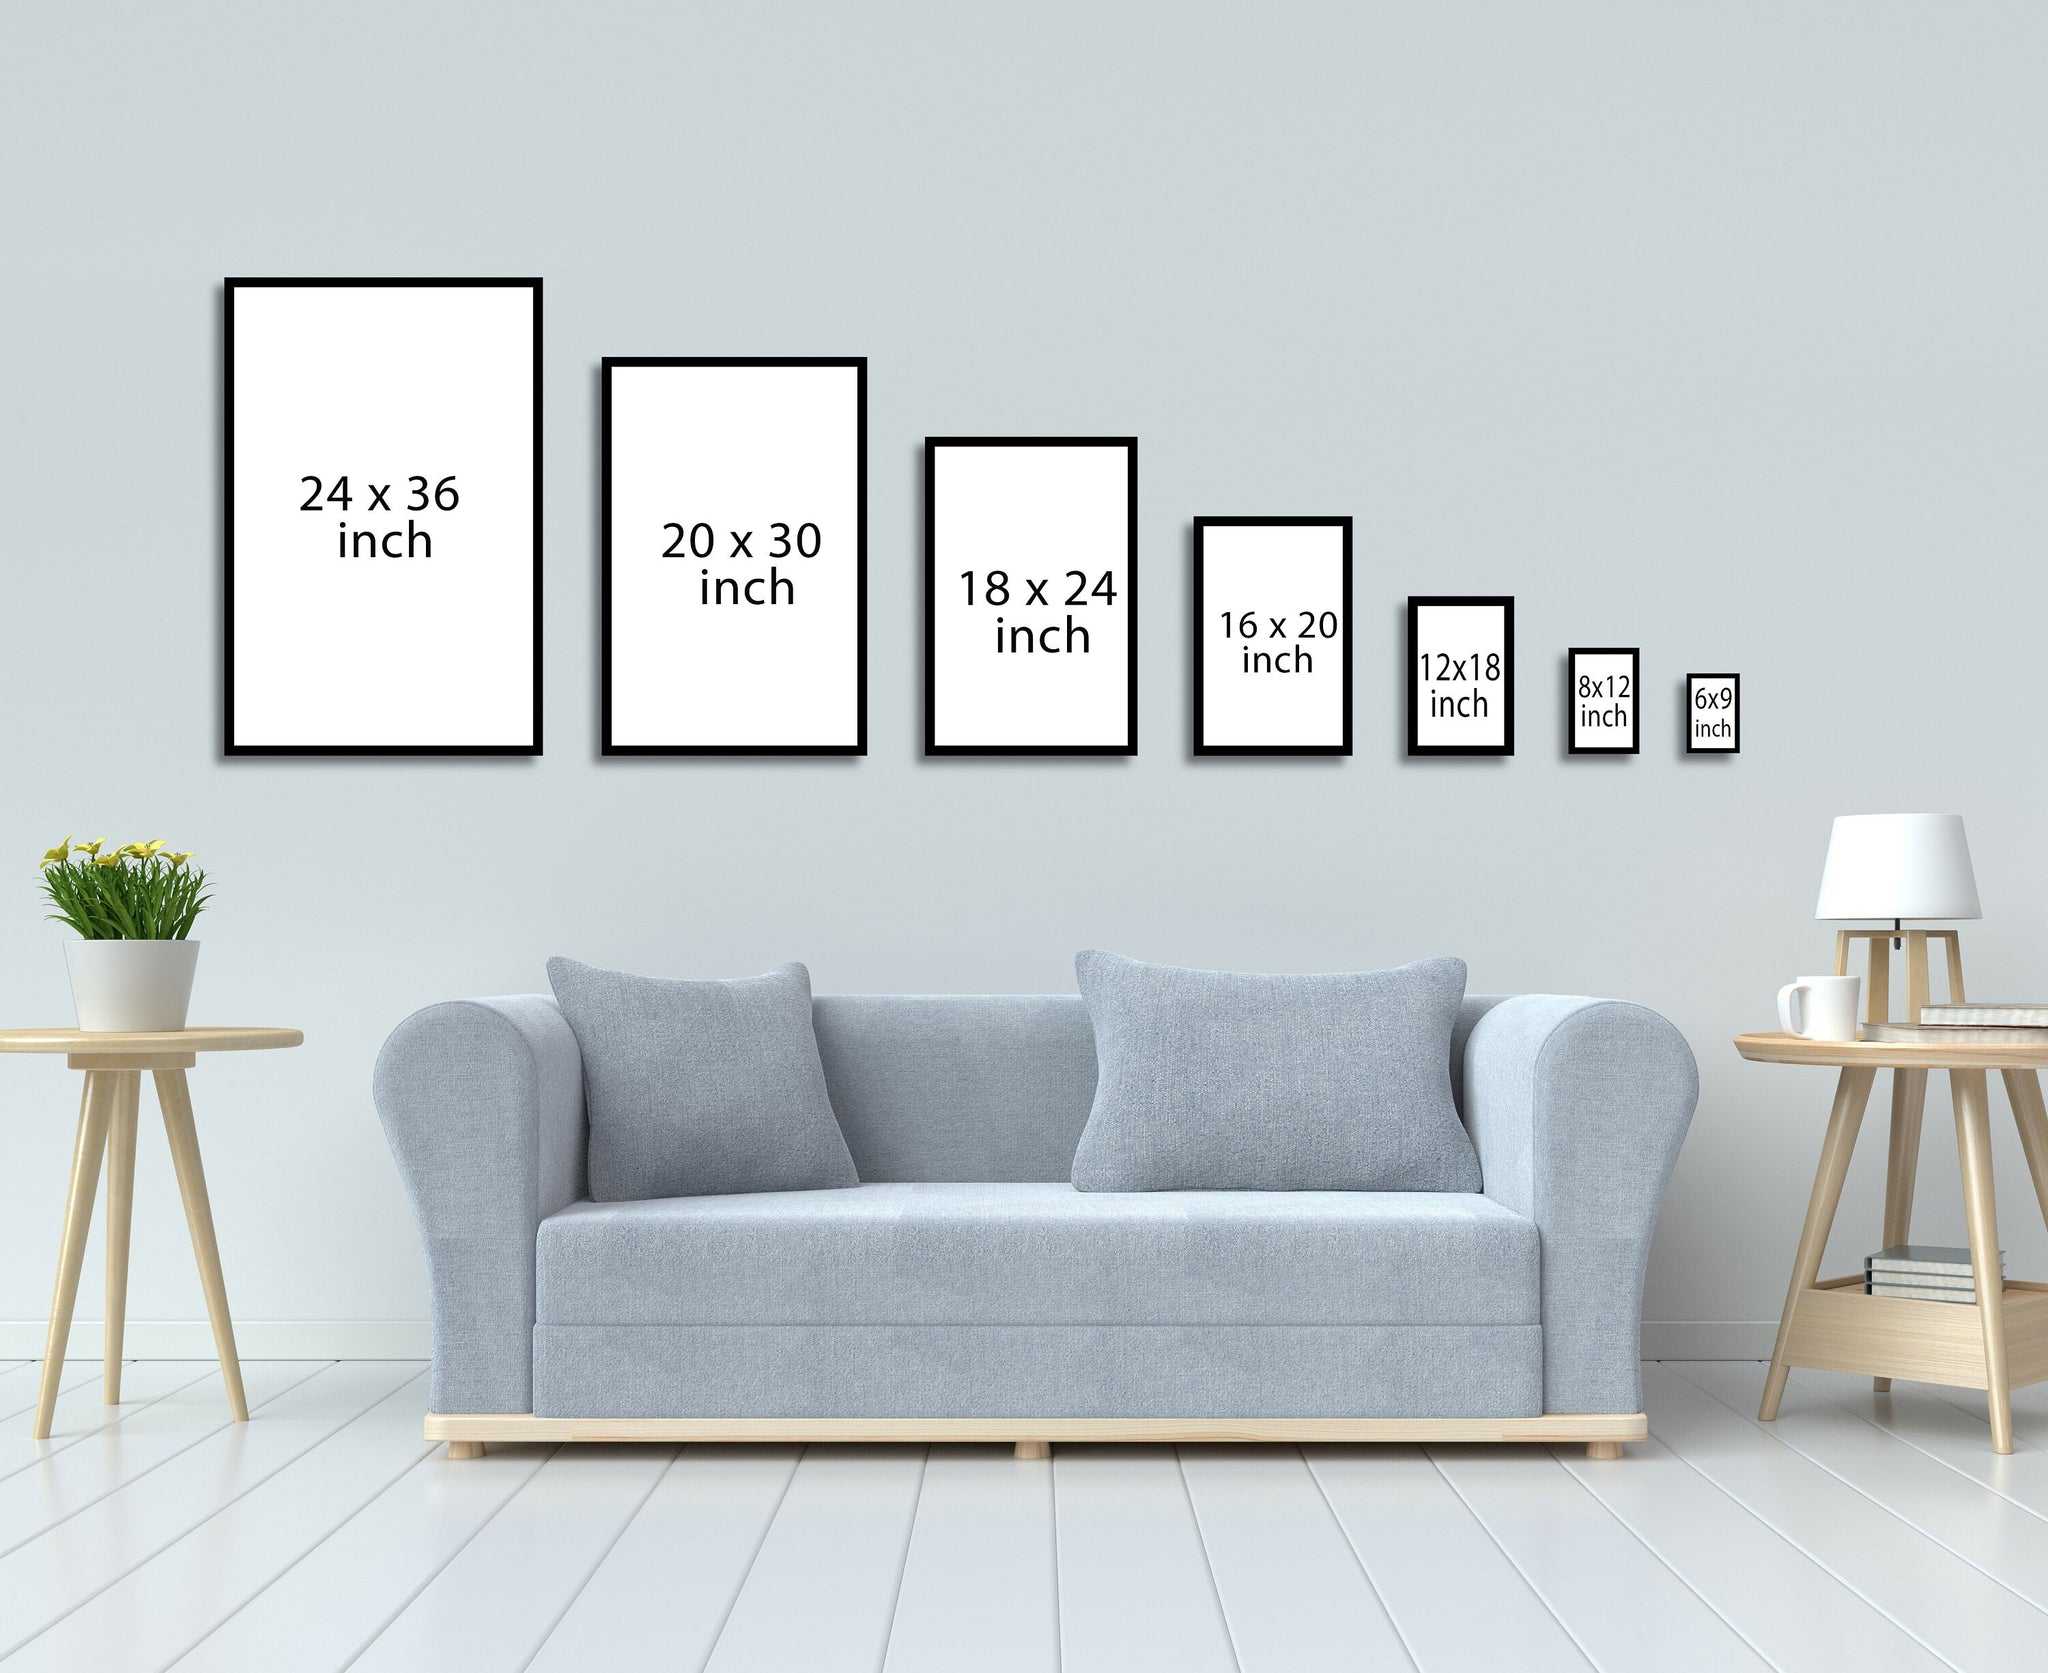 Gym wall art, gym poster print, gym decoration, fitness room wall art, workout quotes, home gym poster, inspired poster, motivational poster